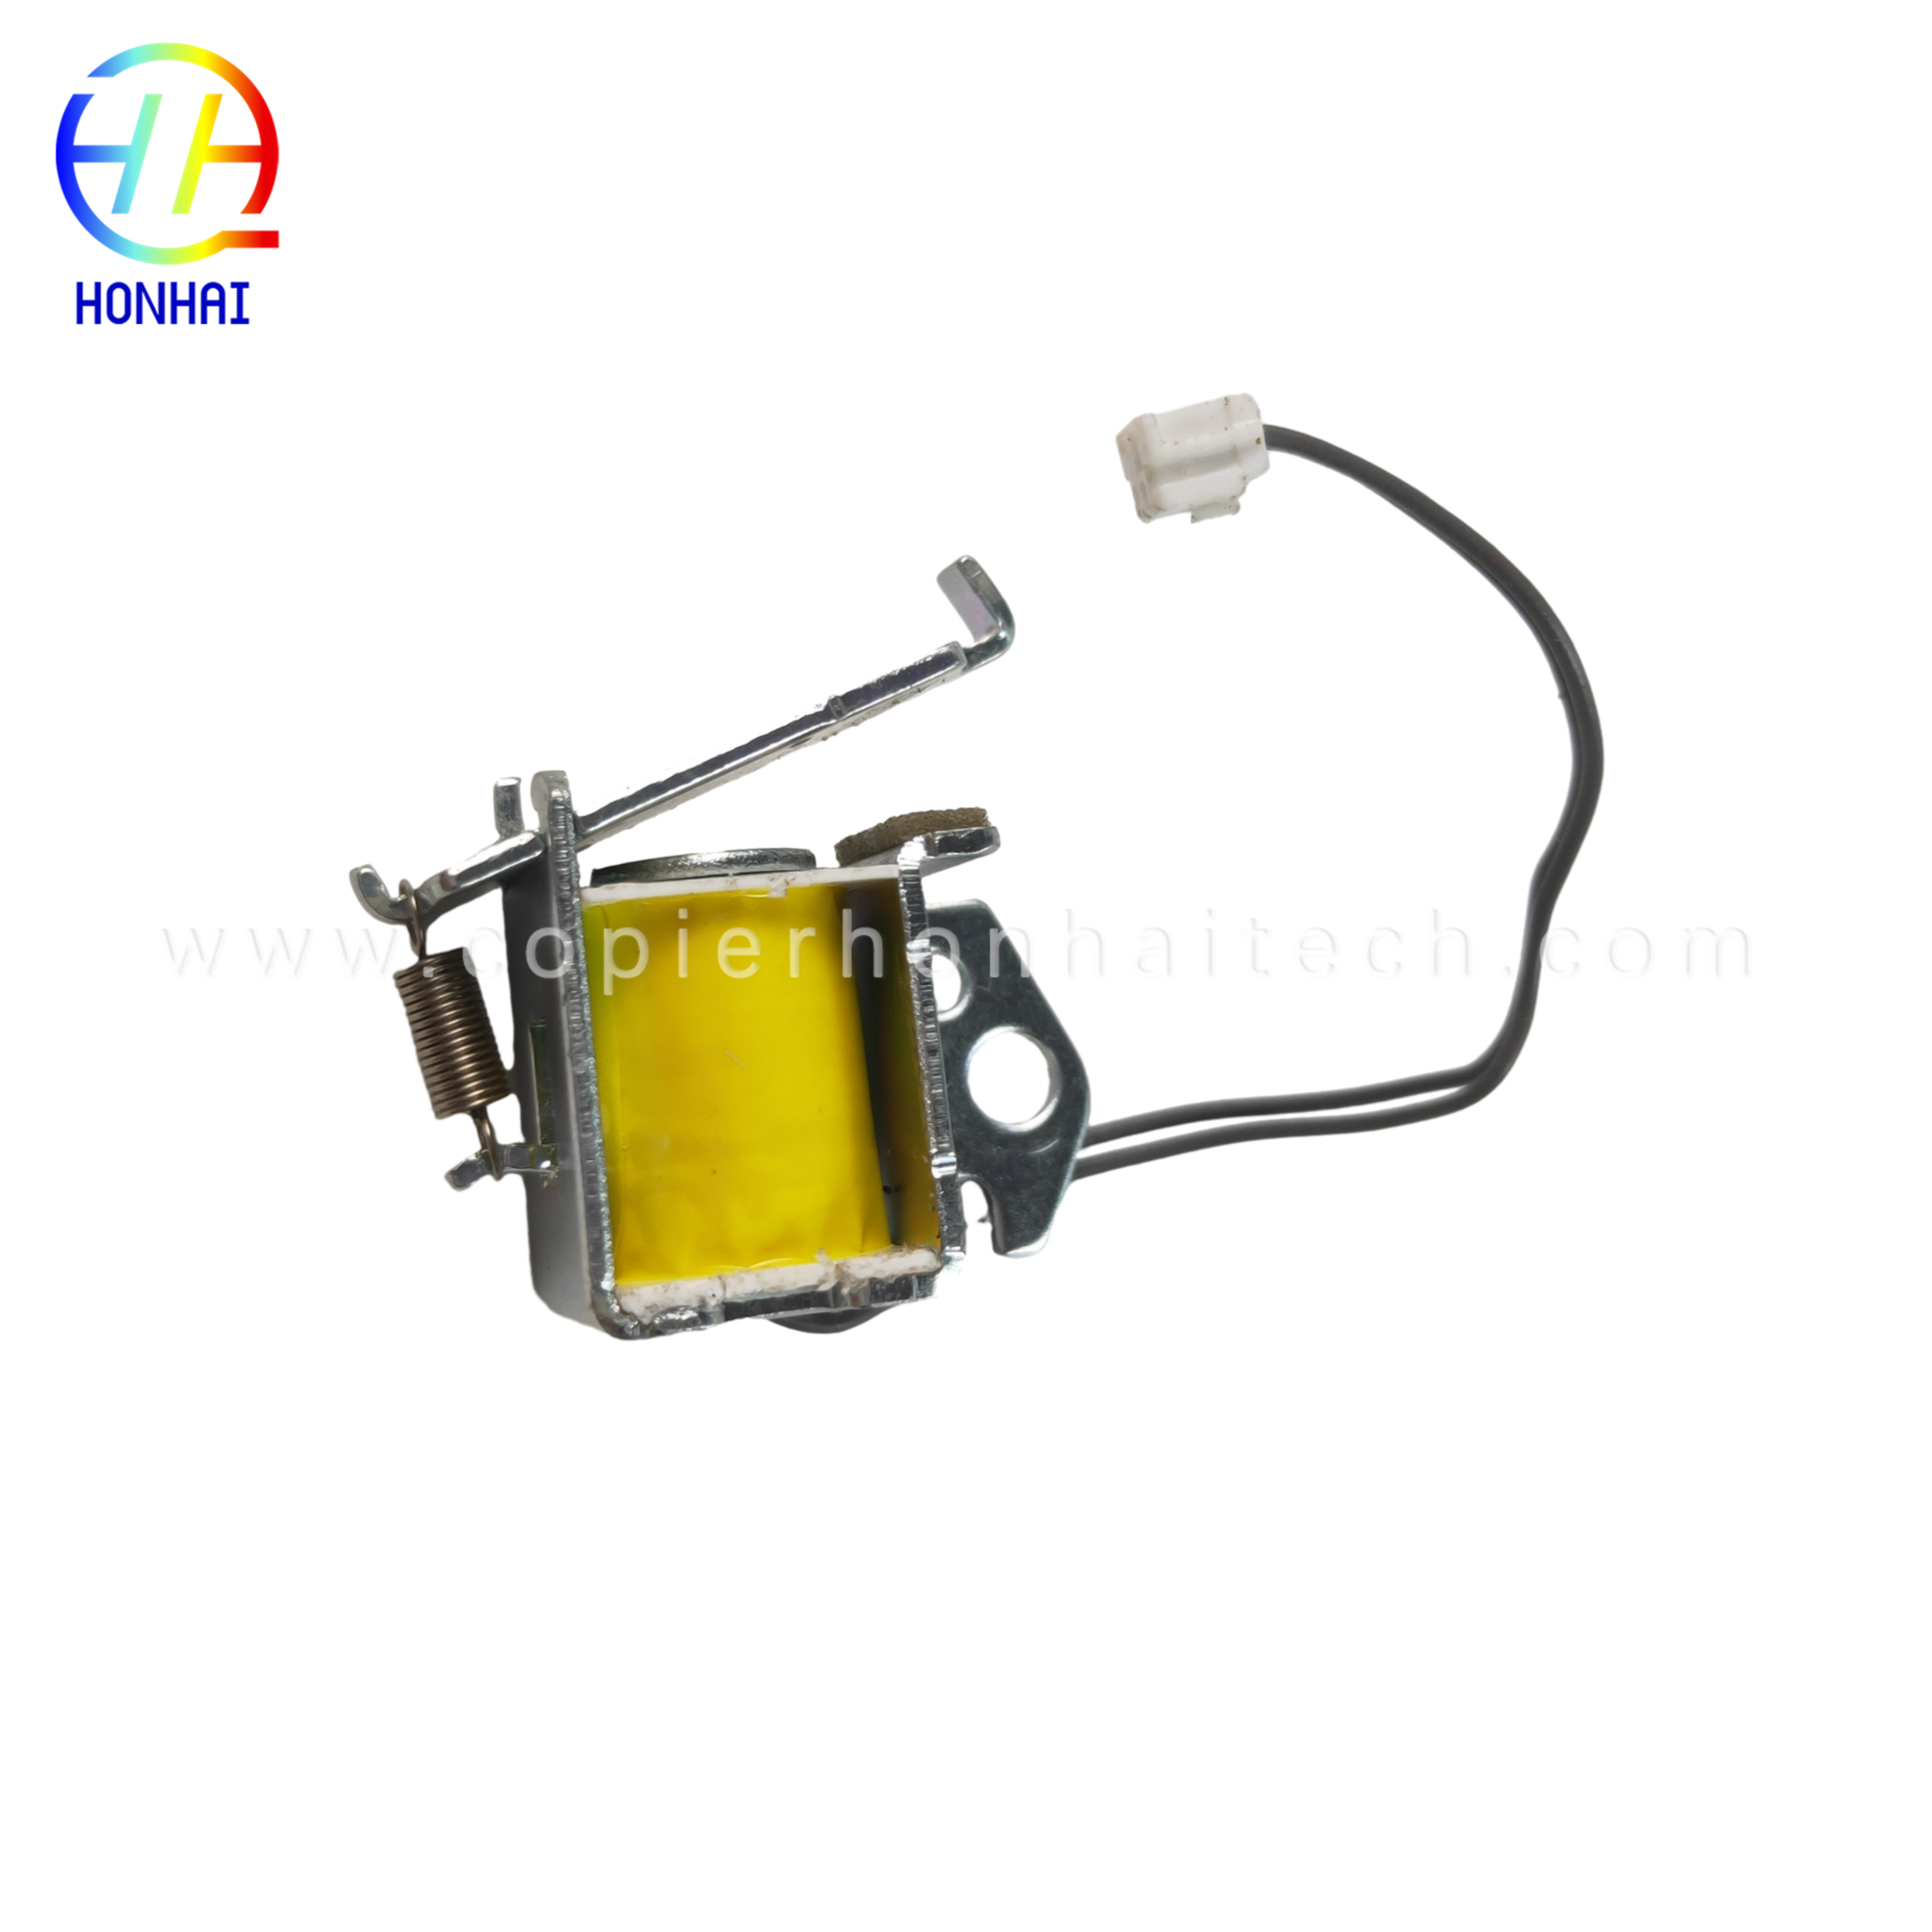 Main Drive Solenoid for HP M252 M274 M277 Series RM2-7414